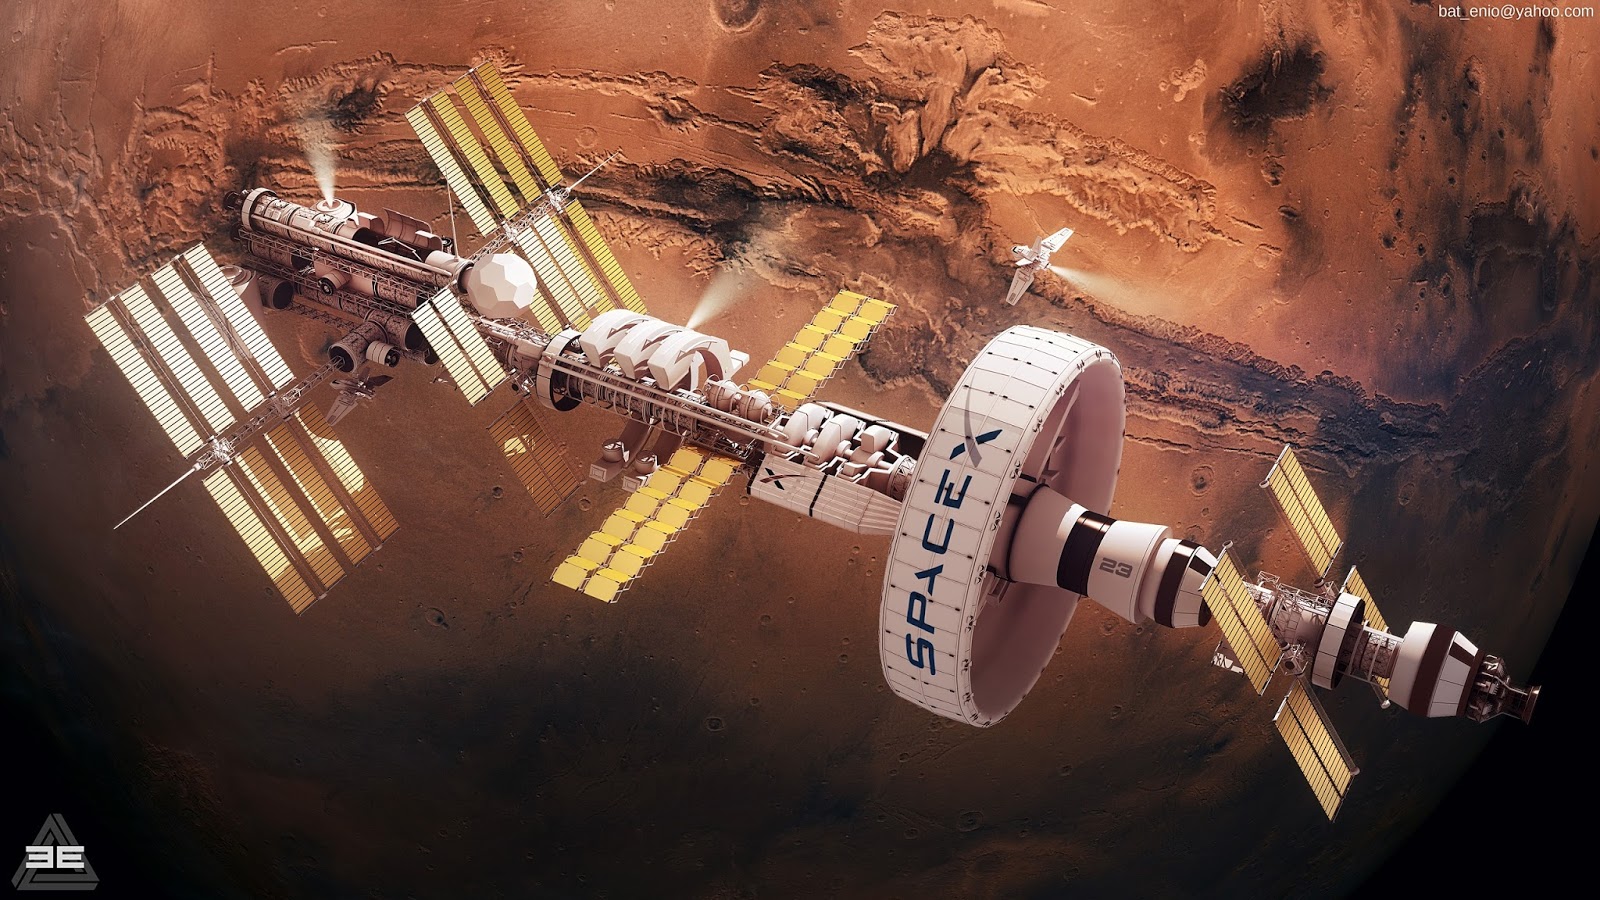 Concept art for SpaceX Mars orbital station by Encho Enchev